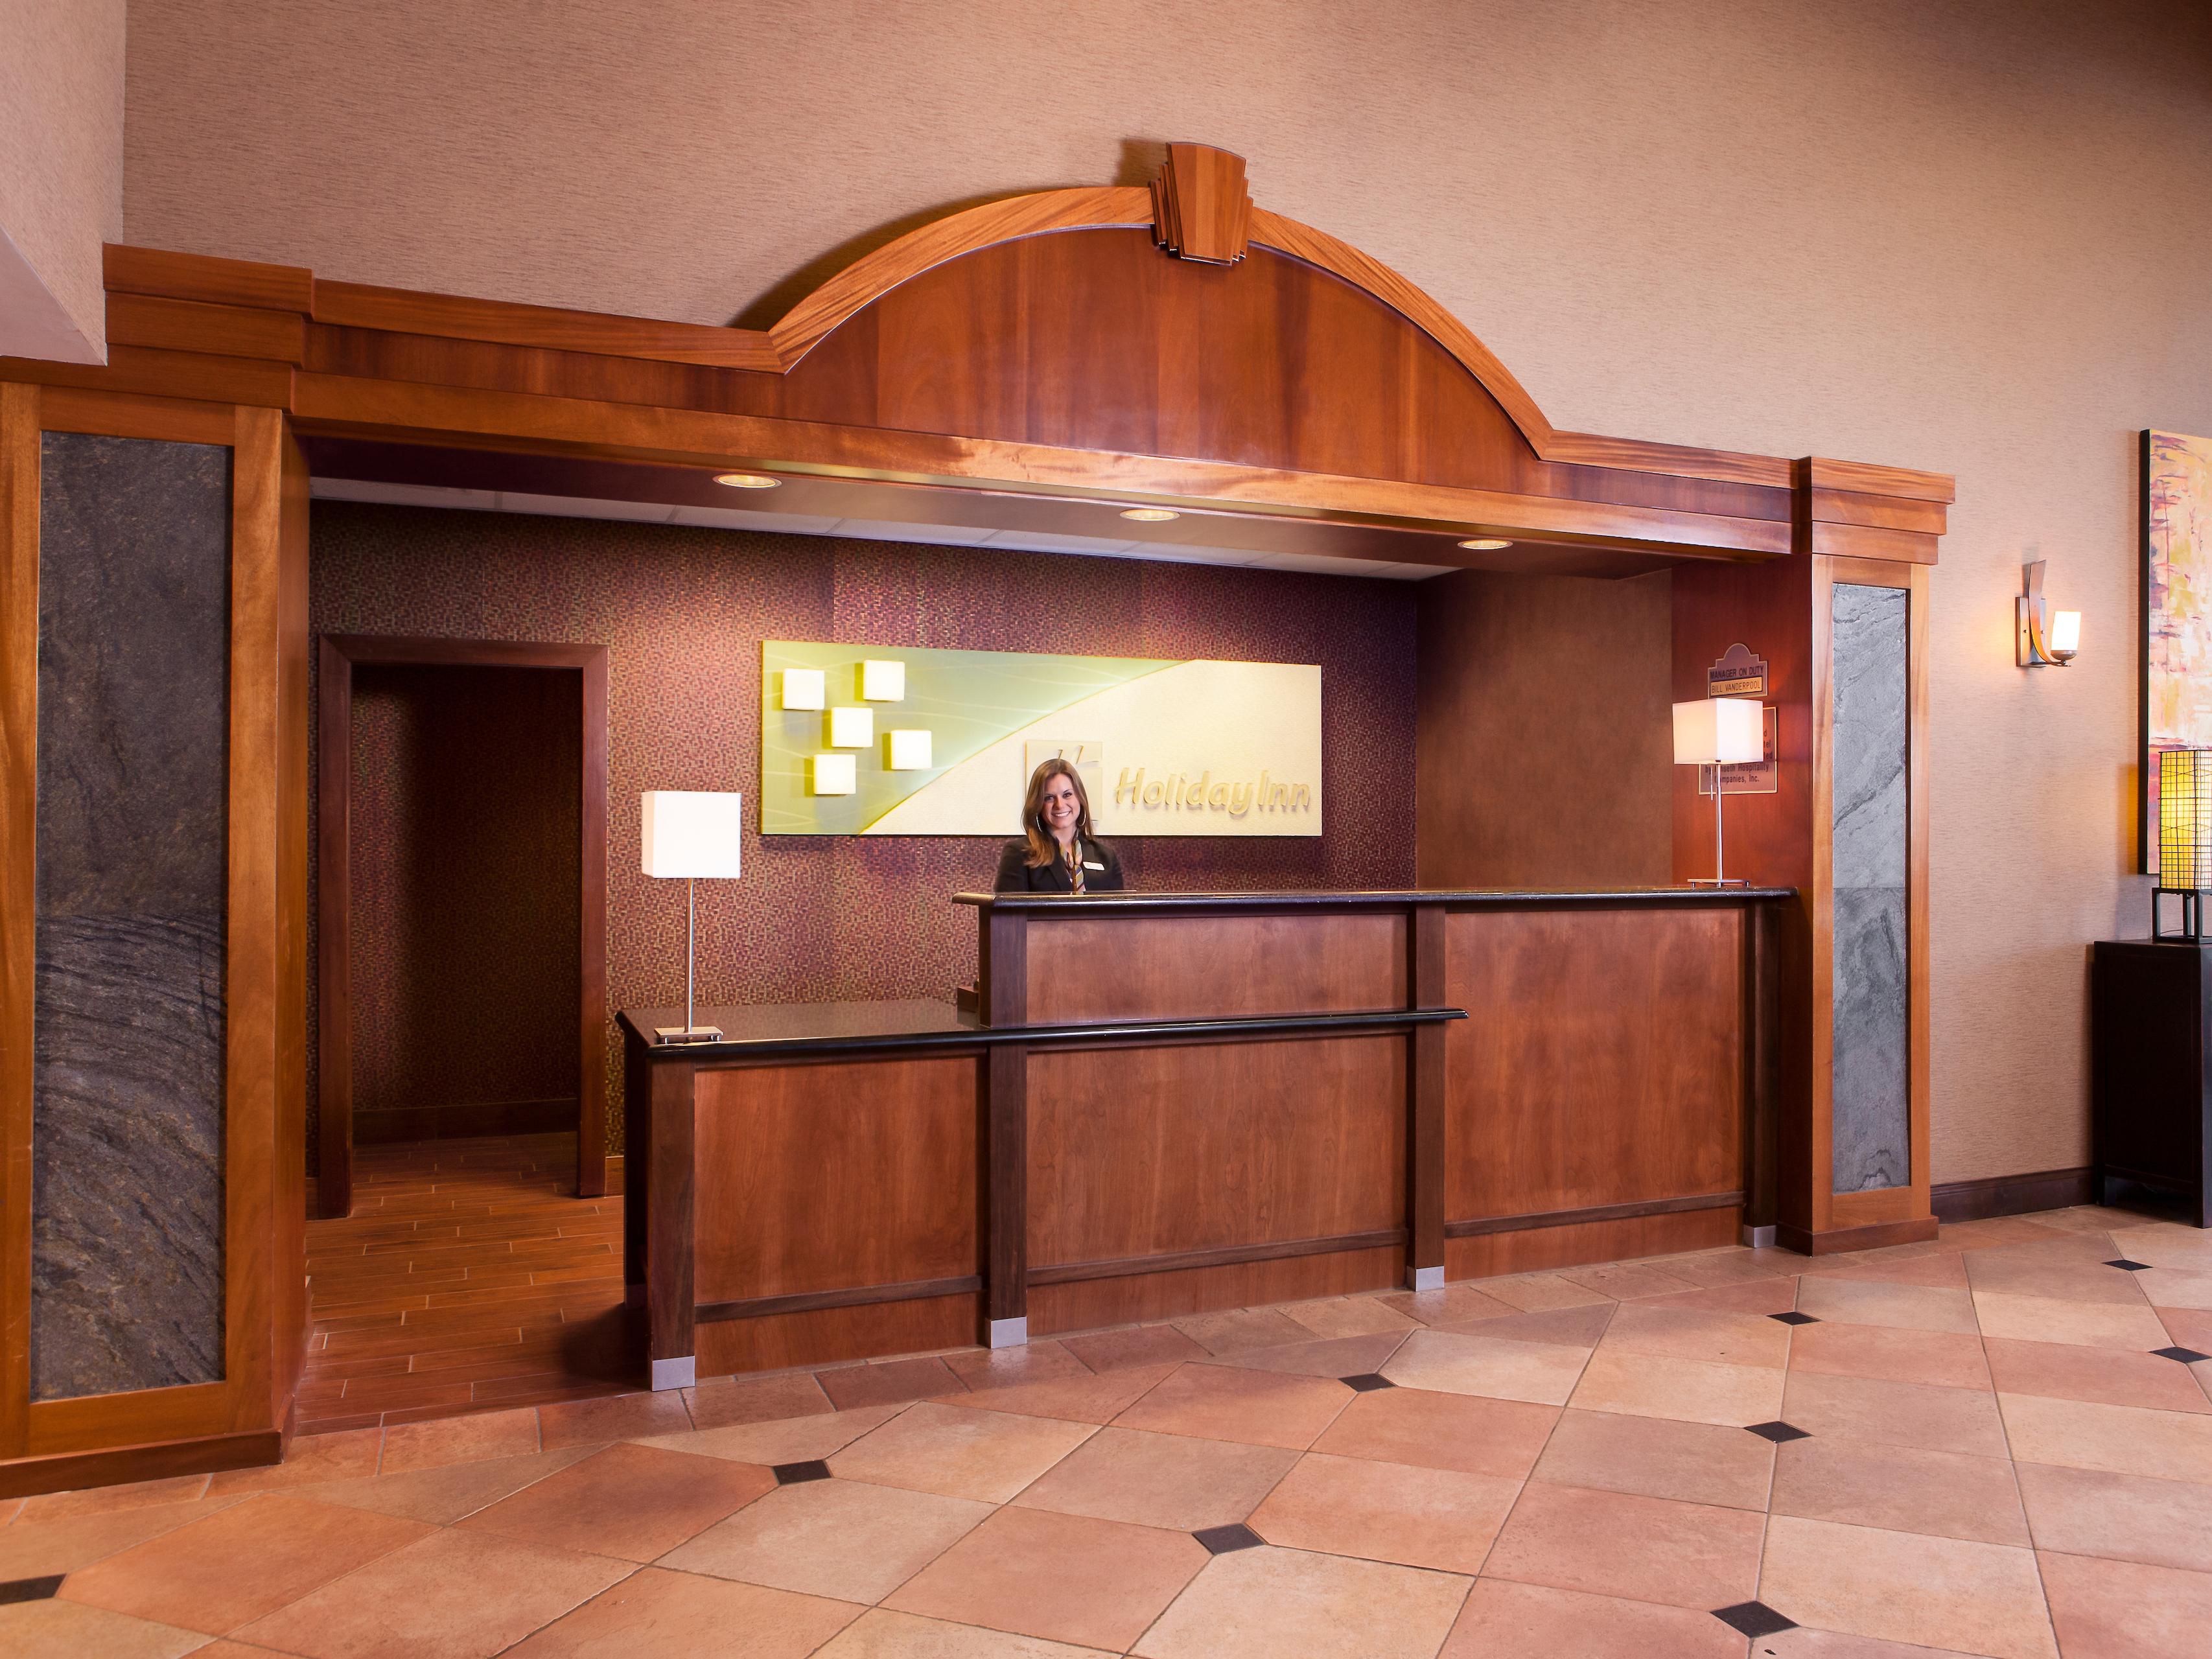 Our guests love our 24-hour complimentary hotel shuttle. Our shuttle can take you to numerous local Omaha and Council Bluffs attractions like Henry Doorly Zoo, Rosenblatt Stadium, TD Ameritrade Park, the Old Market and the Qwest Center, and the Omaha Airport. Contact our front desk staff at 712-322-5050 to make arrangements for our shuttle service.